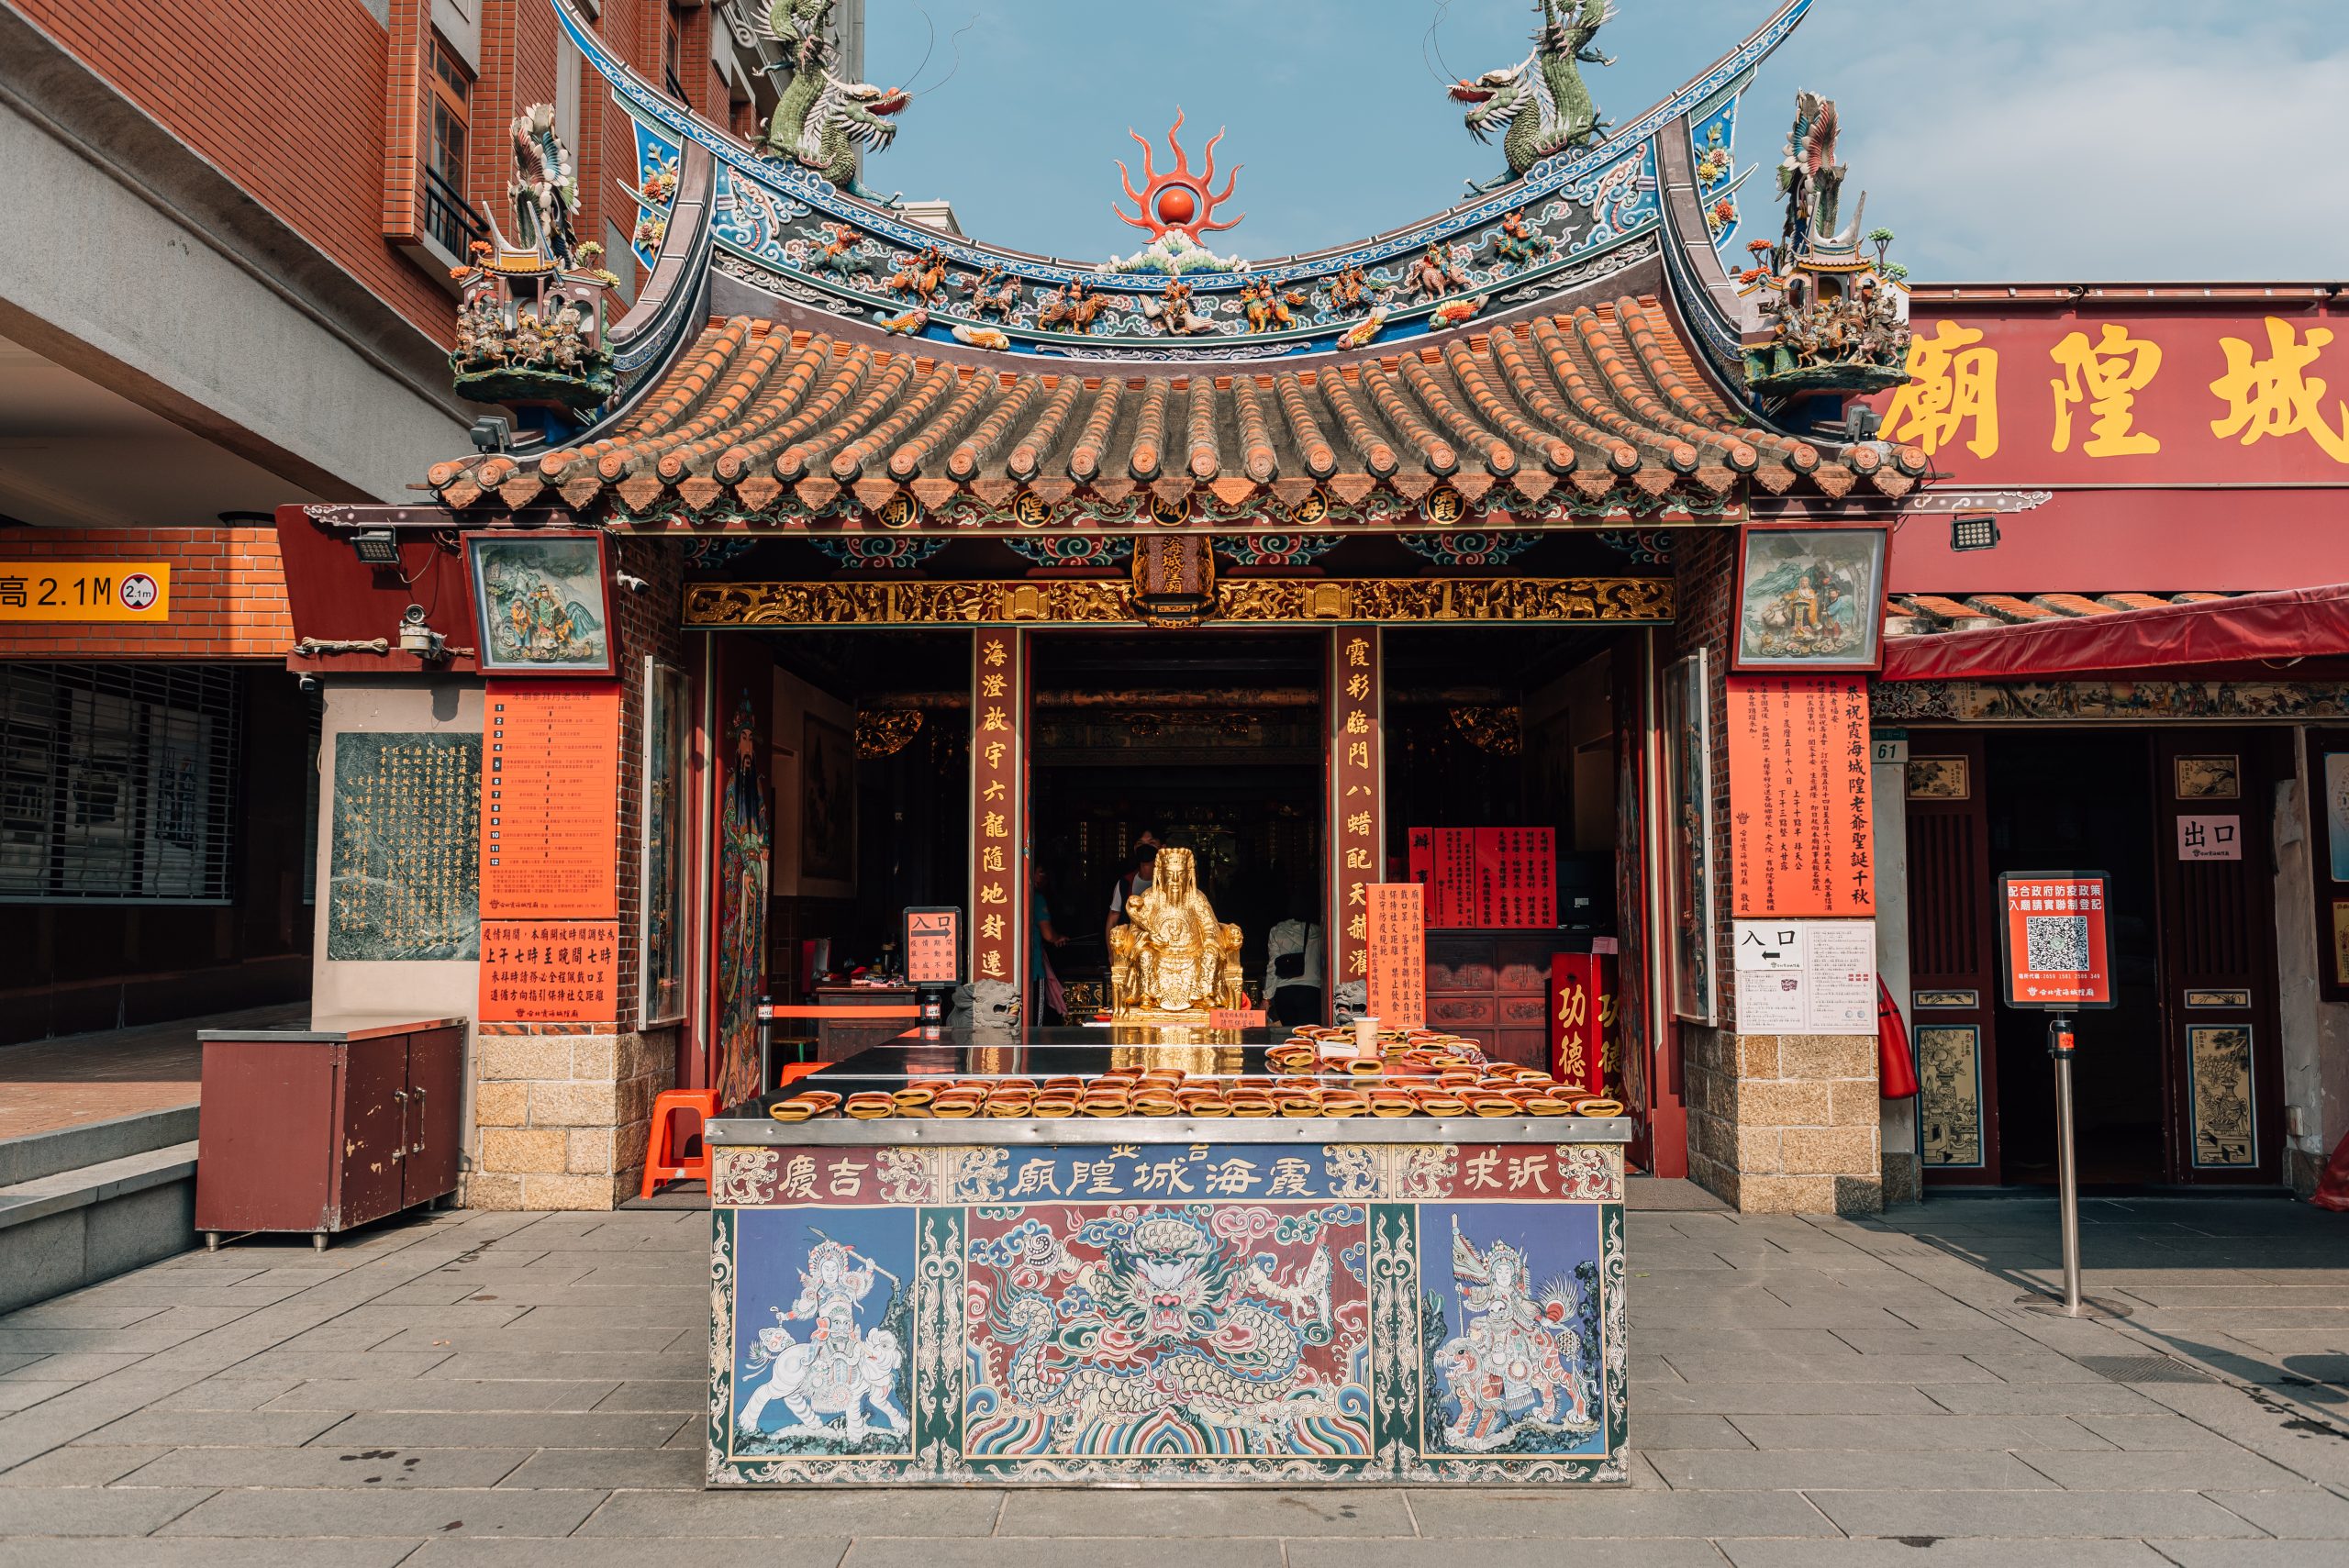 The well-known Taipei Xia-Hai City God Temple (台北霞海城隍廟)  is meccas for people looking for love or marriage, attracting not only Taiwanese but also foreign tourists. 
(Photo・Samil Kao)